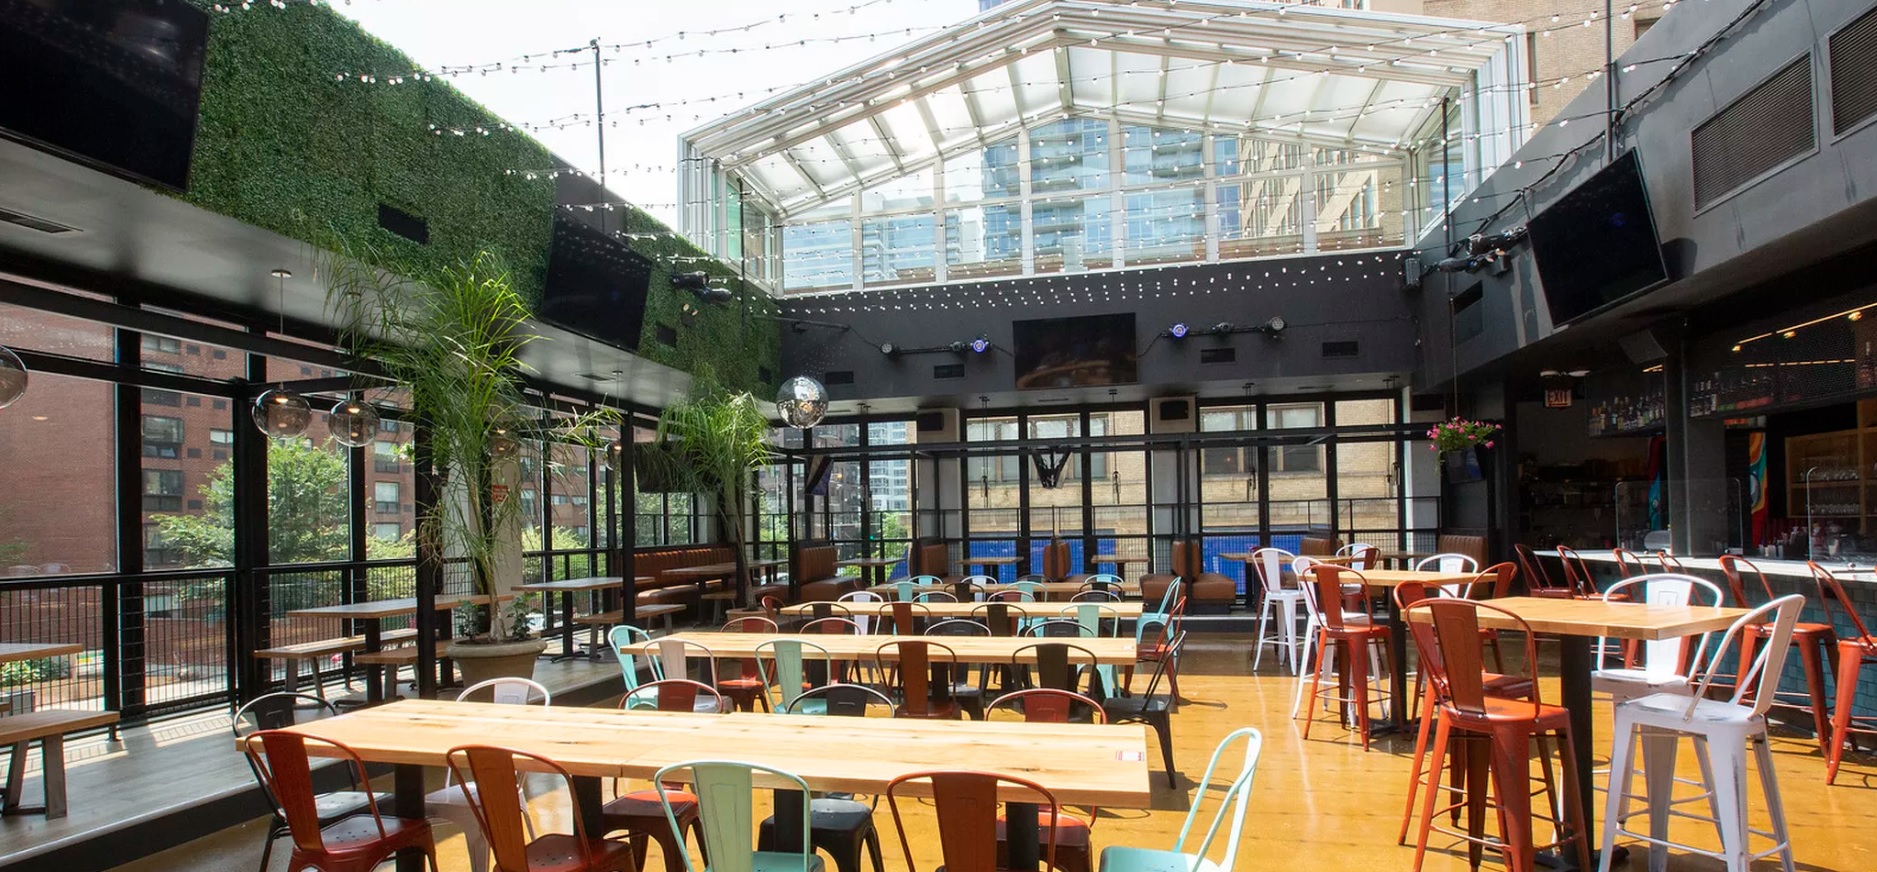 roots pizza chicago retractable glass roof